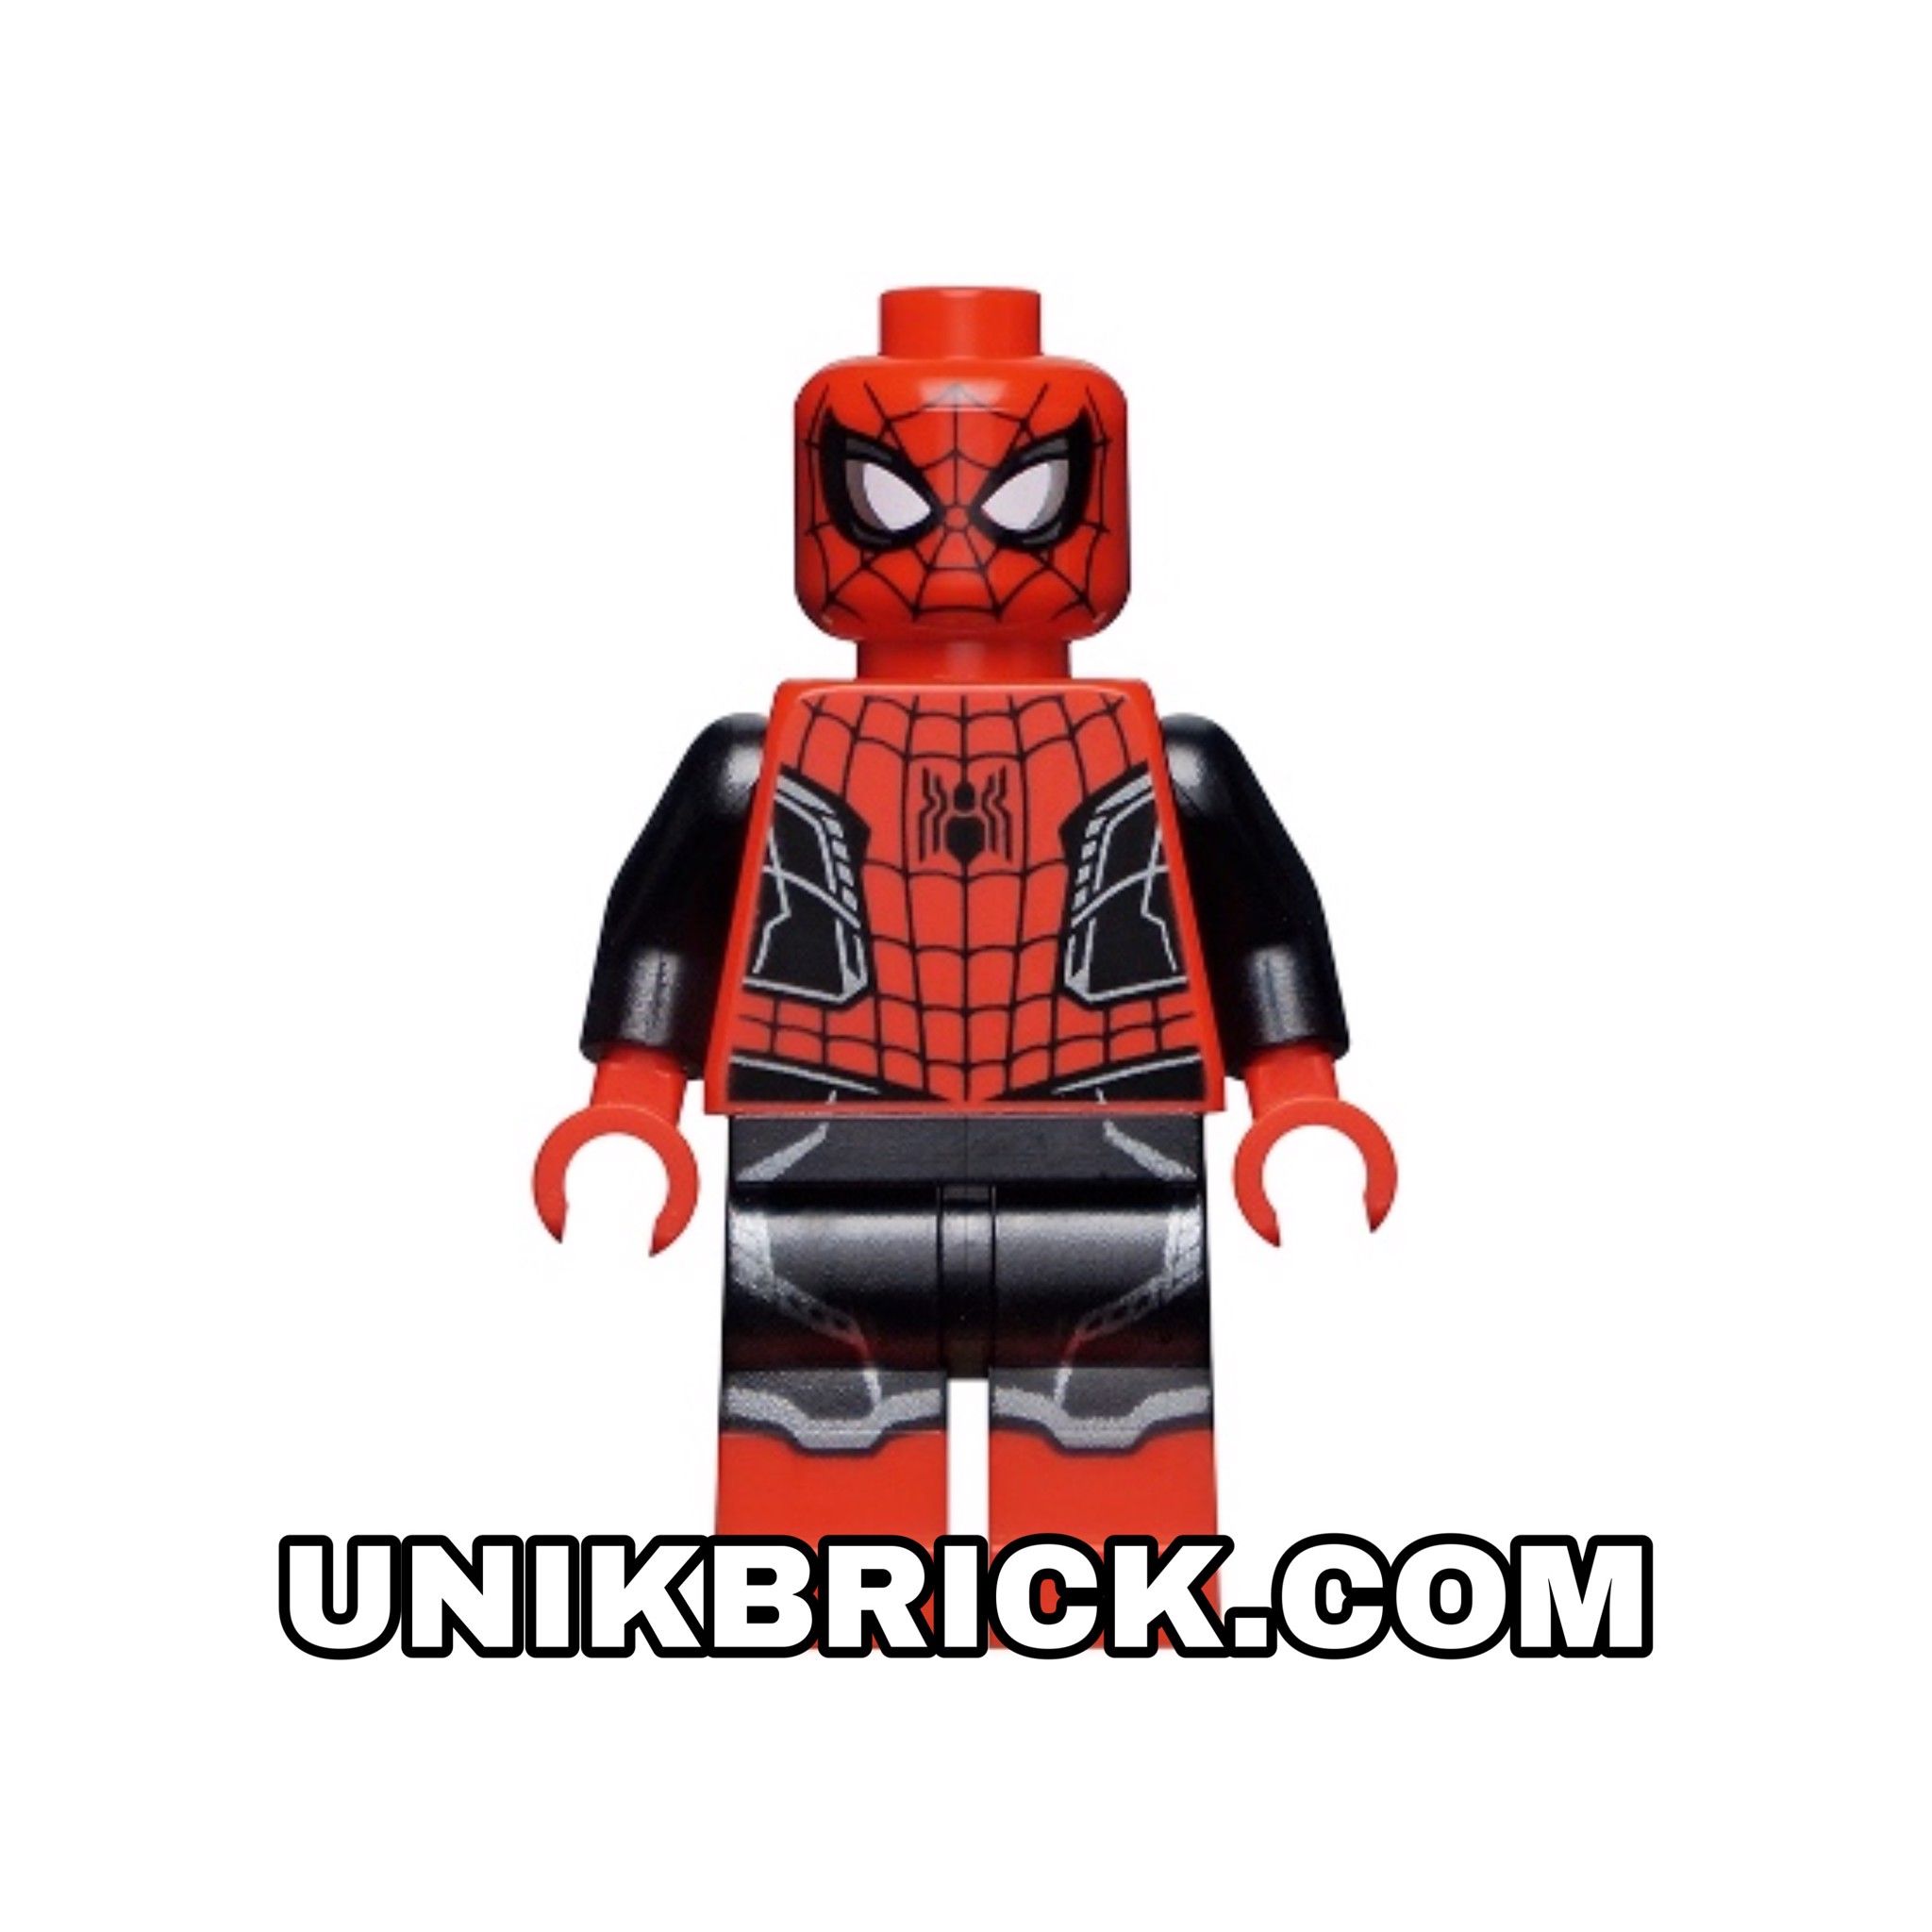 ORDER ITEMS] LEGO Spider Man Black and Red Suit – UNIK BRICK